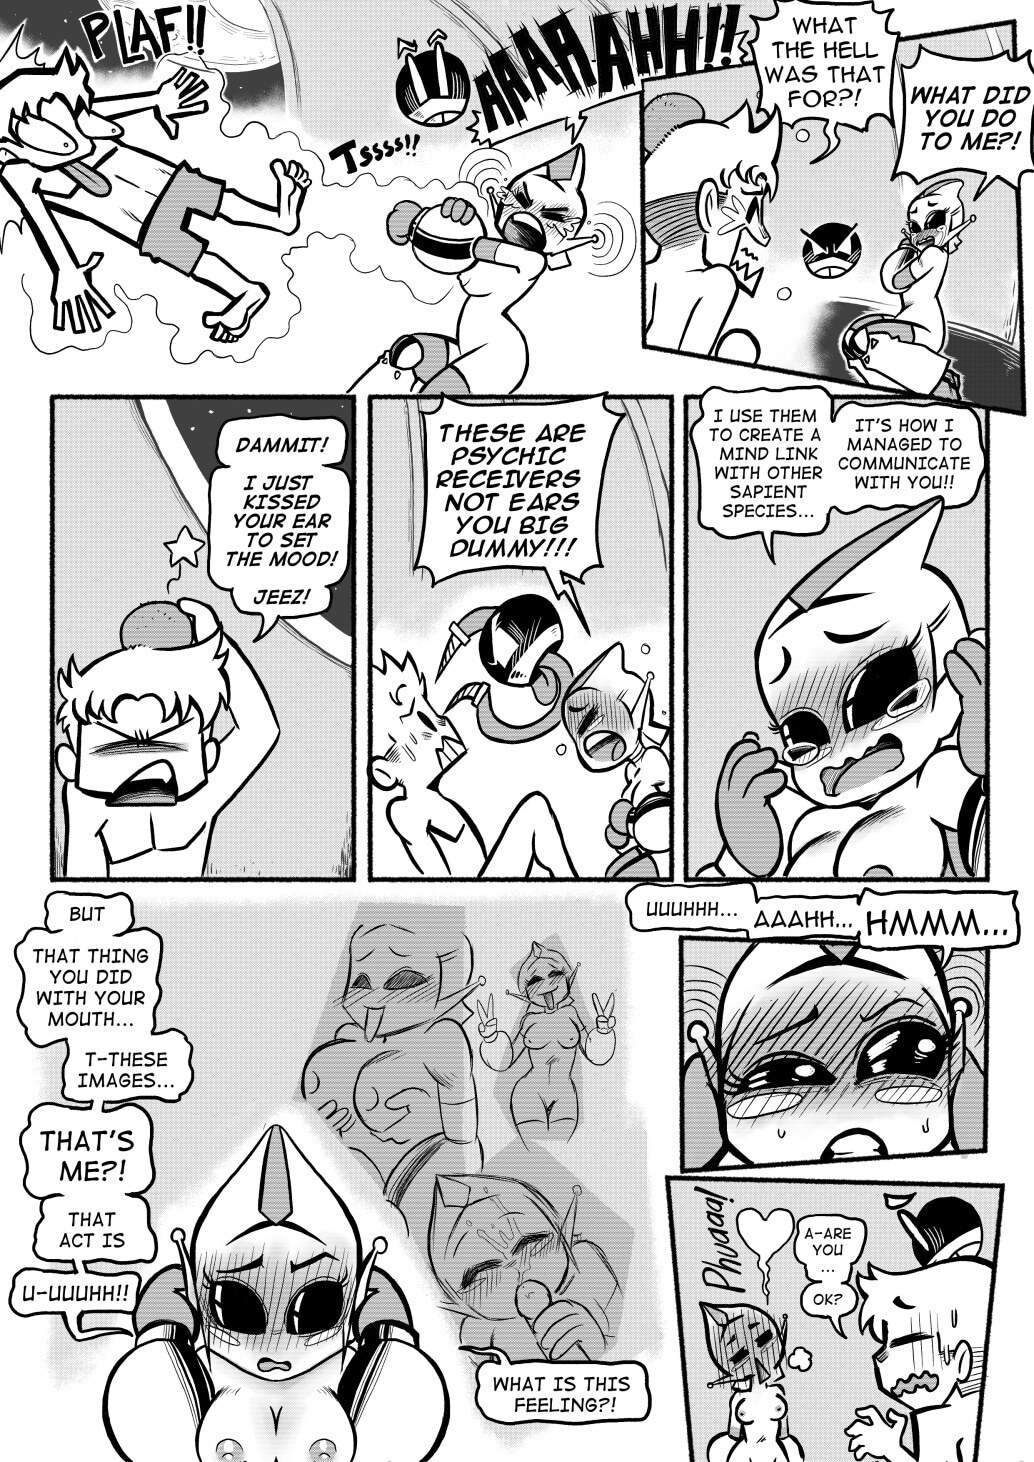 Abducted! - Mr.E - Page 15